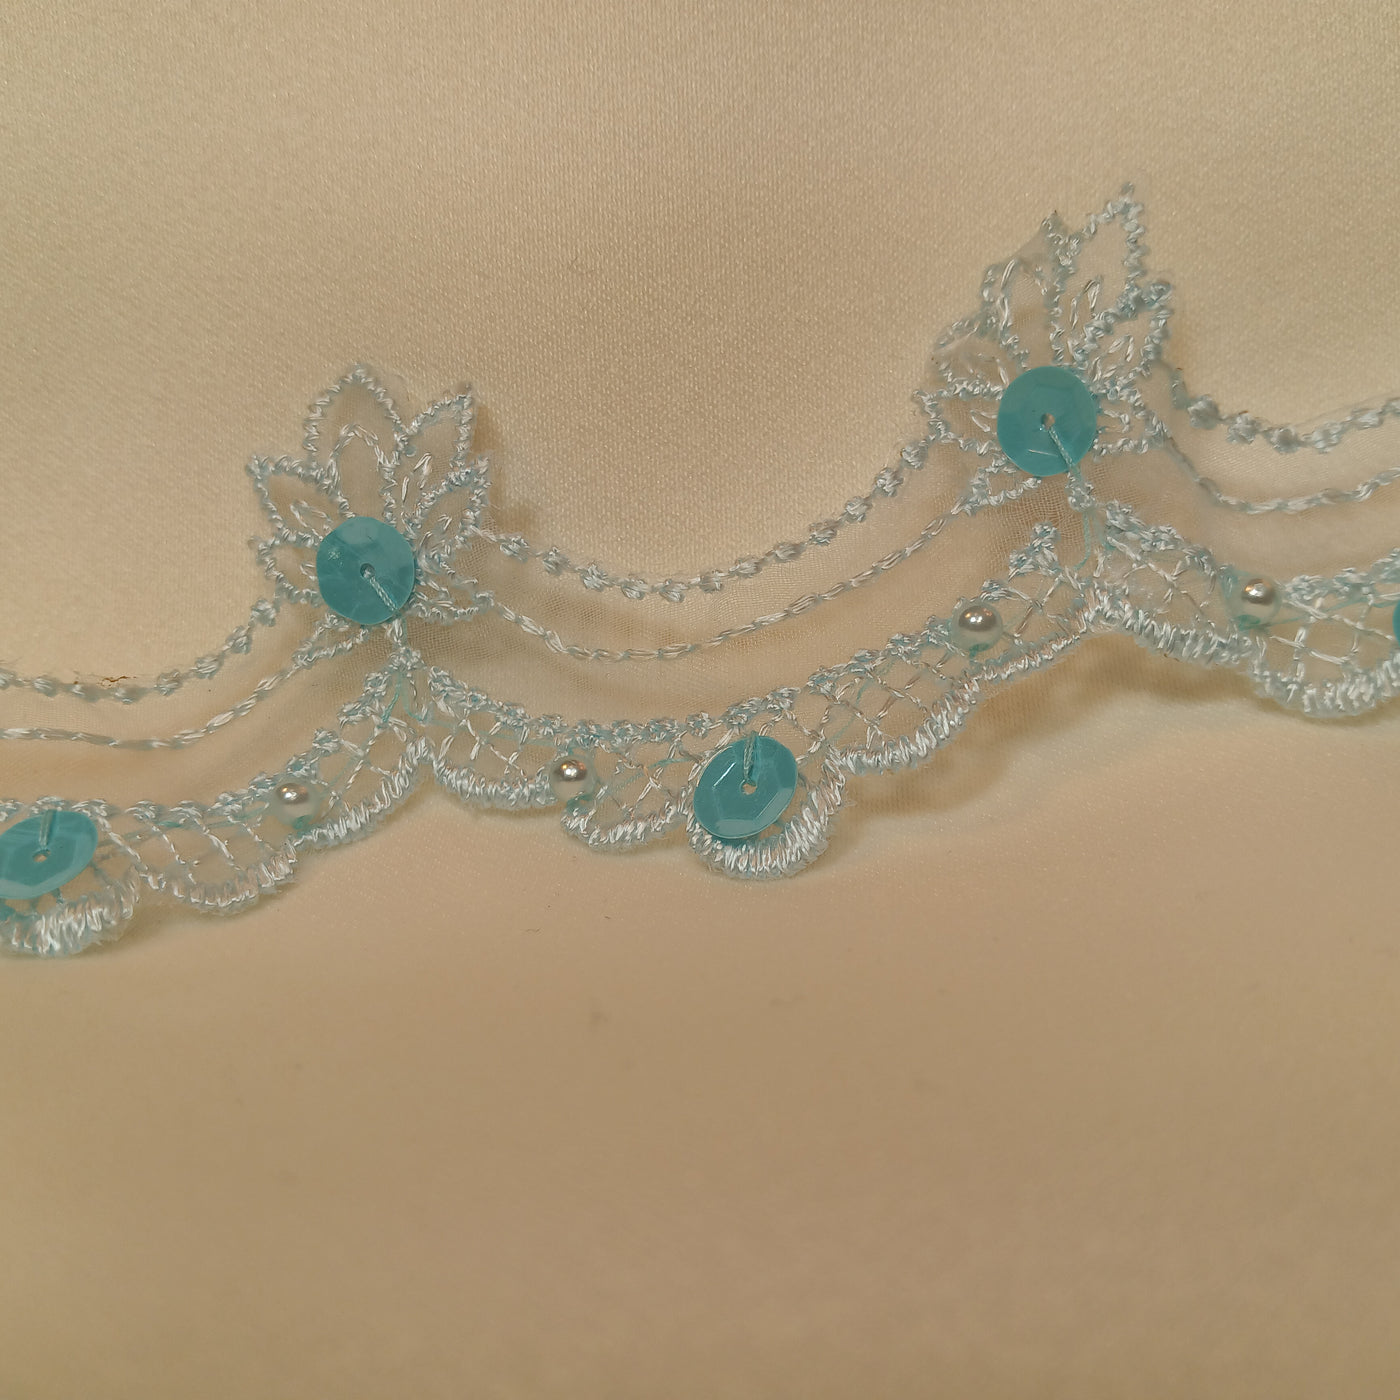 Beaded Lt. Blue Lace Trim Embroidered on 100% Polyester Organza . Large Arch Scalloped Trim. Formal Trim. Perfect for Edging and Gowns.  Sold by the Yard.  Lace Usa